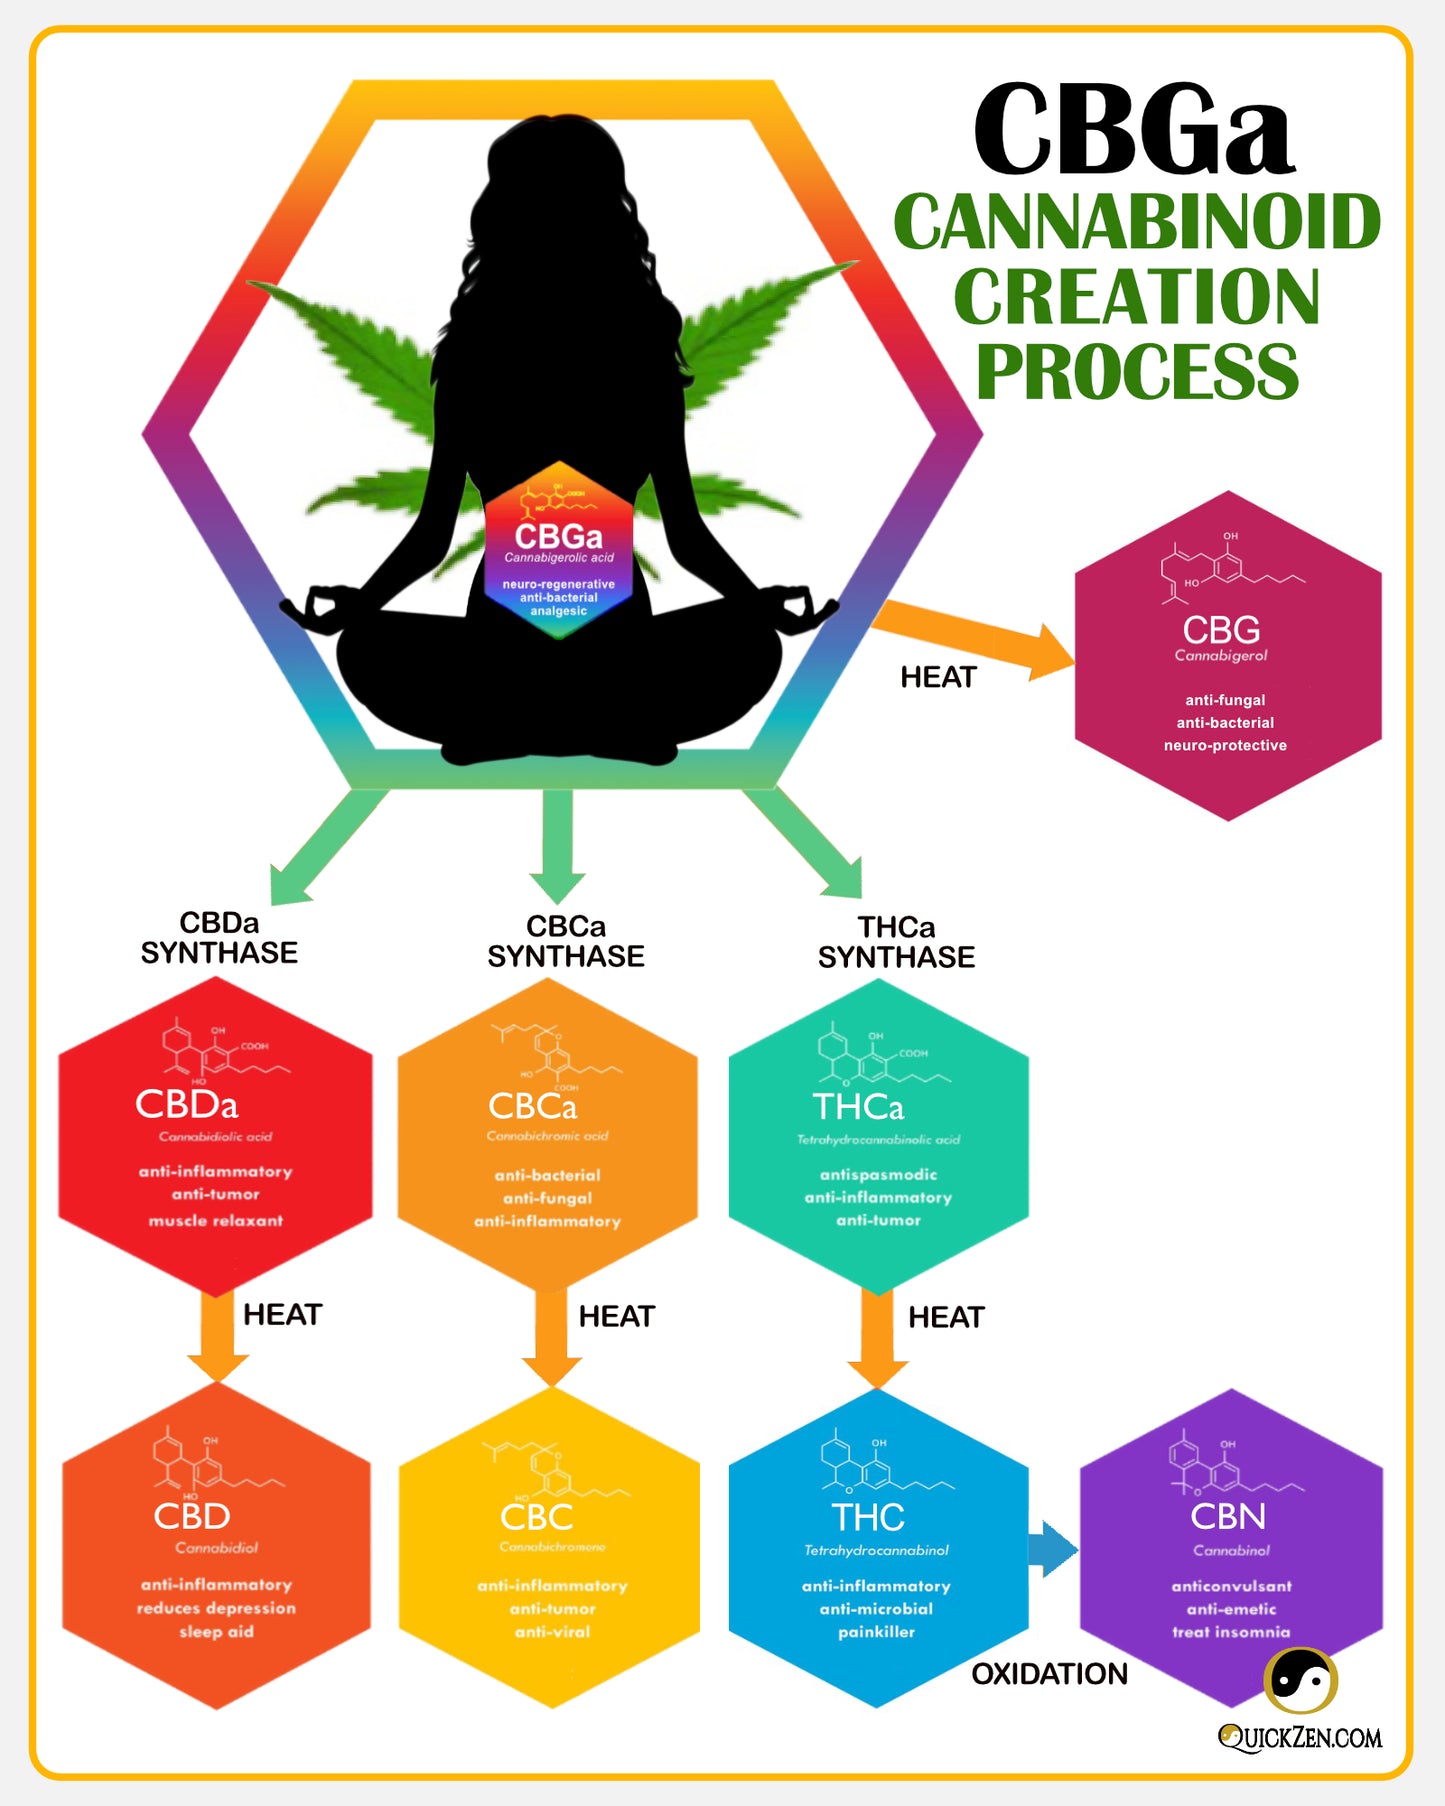 New to CBG? The cannabinoid creation process. CBD, THC, CBG, CBN and everything else is created from CBGa.